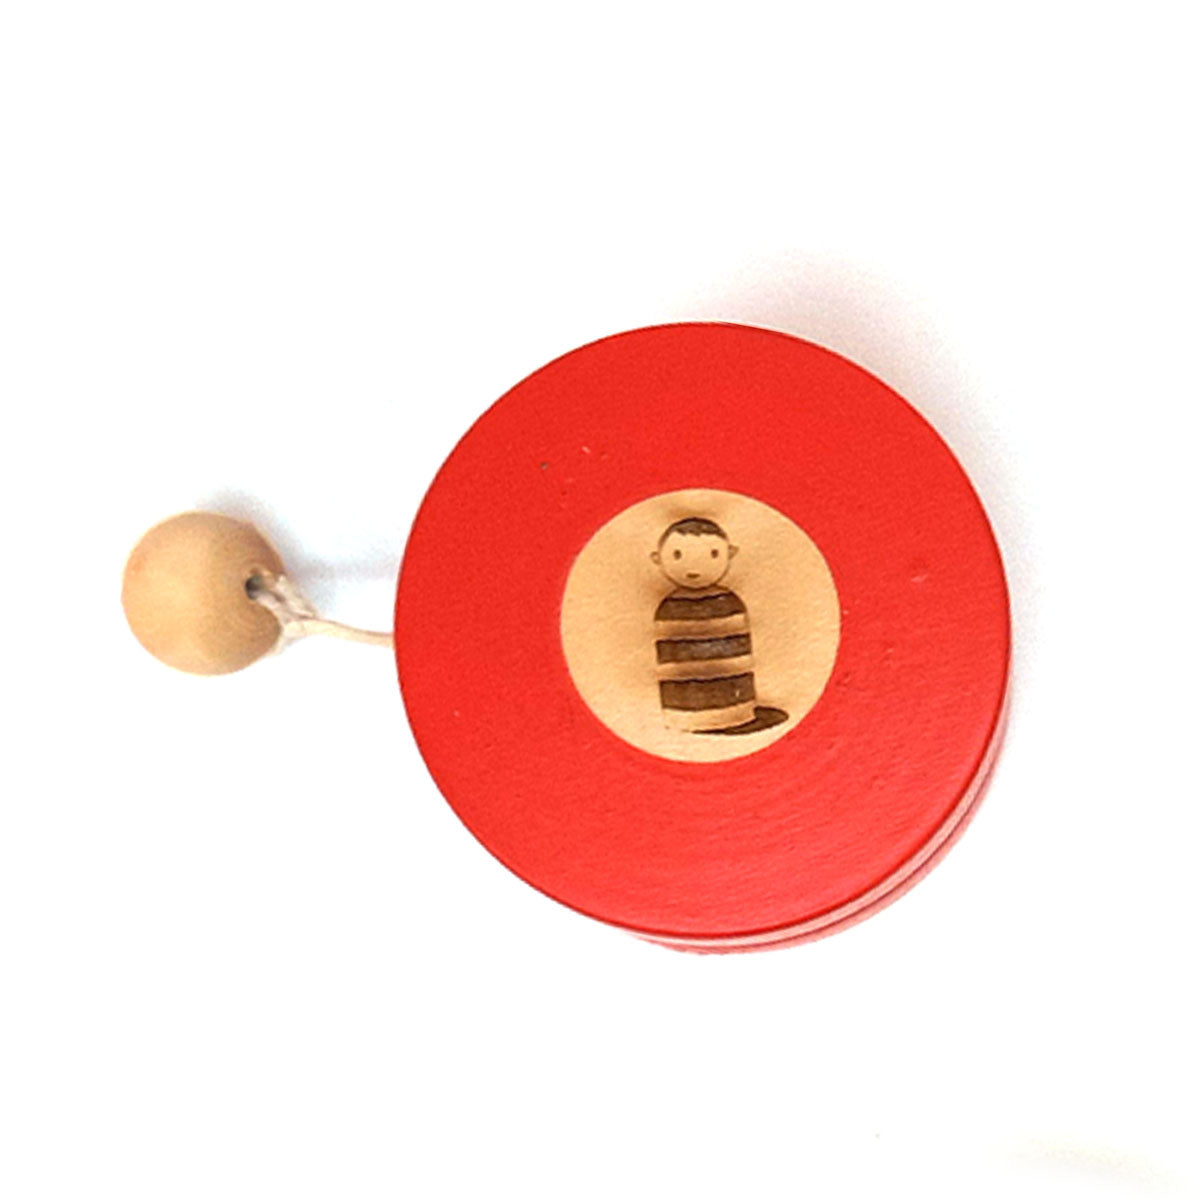 YoYo Toy  Buy Wooden YoYo Toy Fun for All Ages (Pack of 2